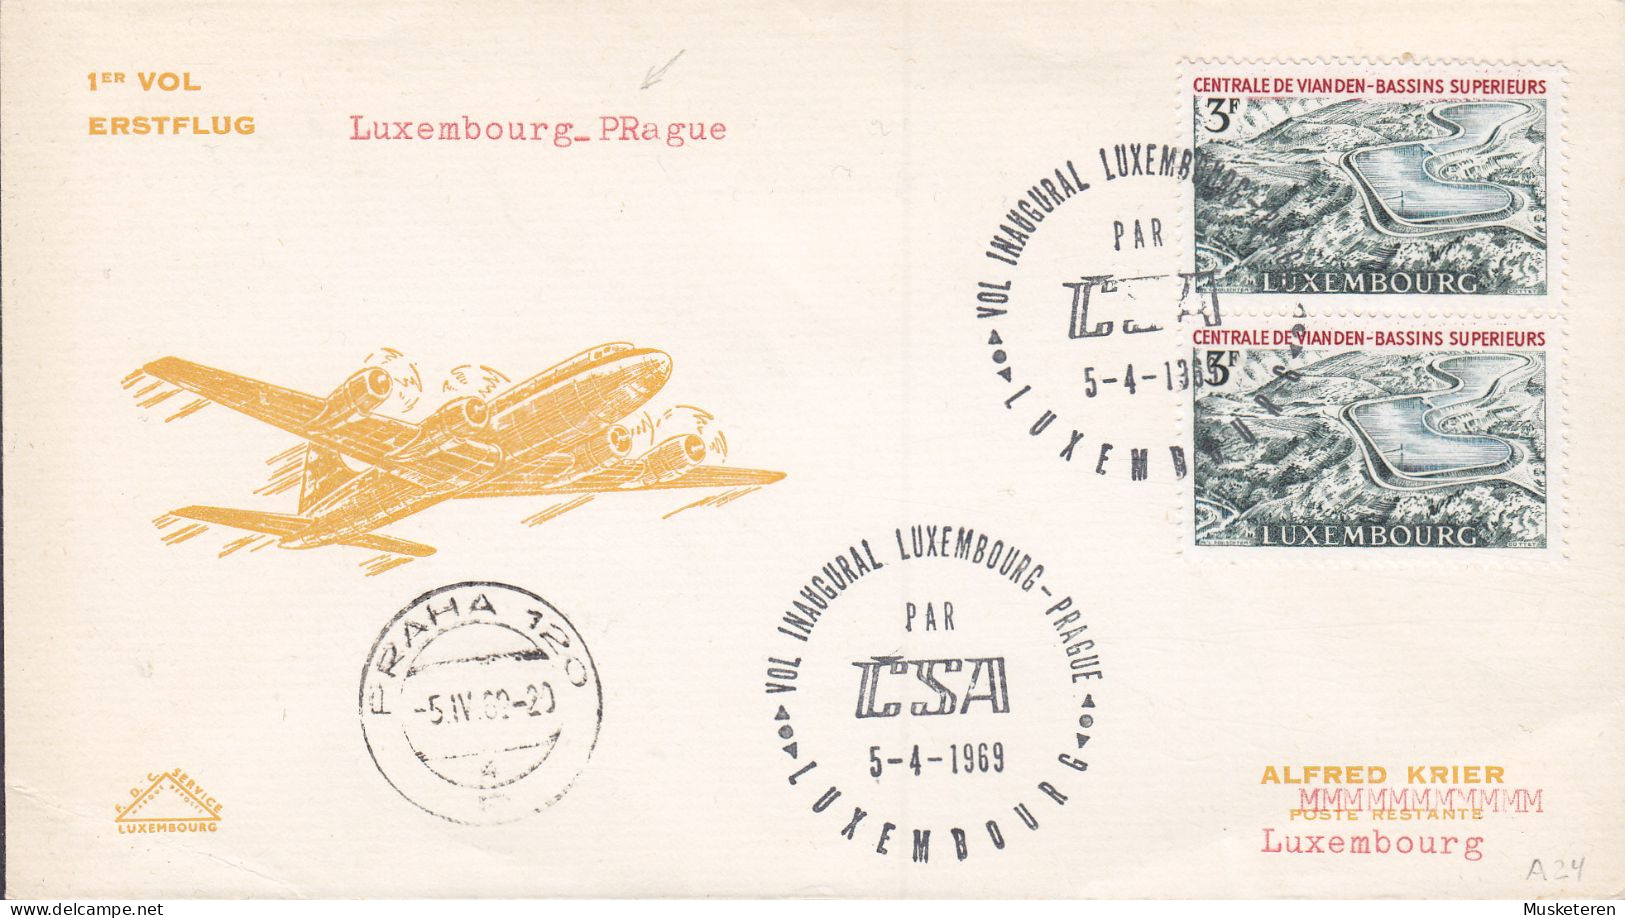 Luxembourg CSA First Flight Premier Vol LUXEMBOURG - PRAGUE, LUXEMBOURG 1969 Cover Brief Lettre - Lettres & Documents